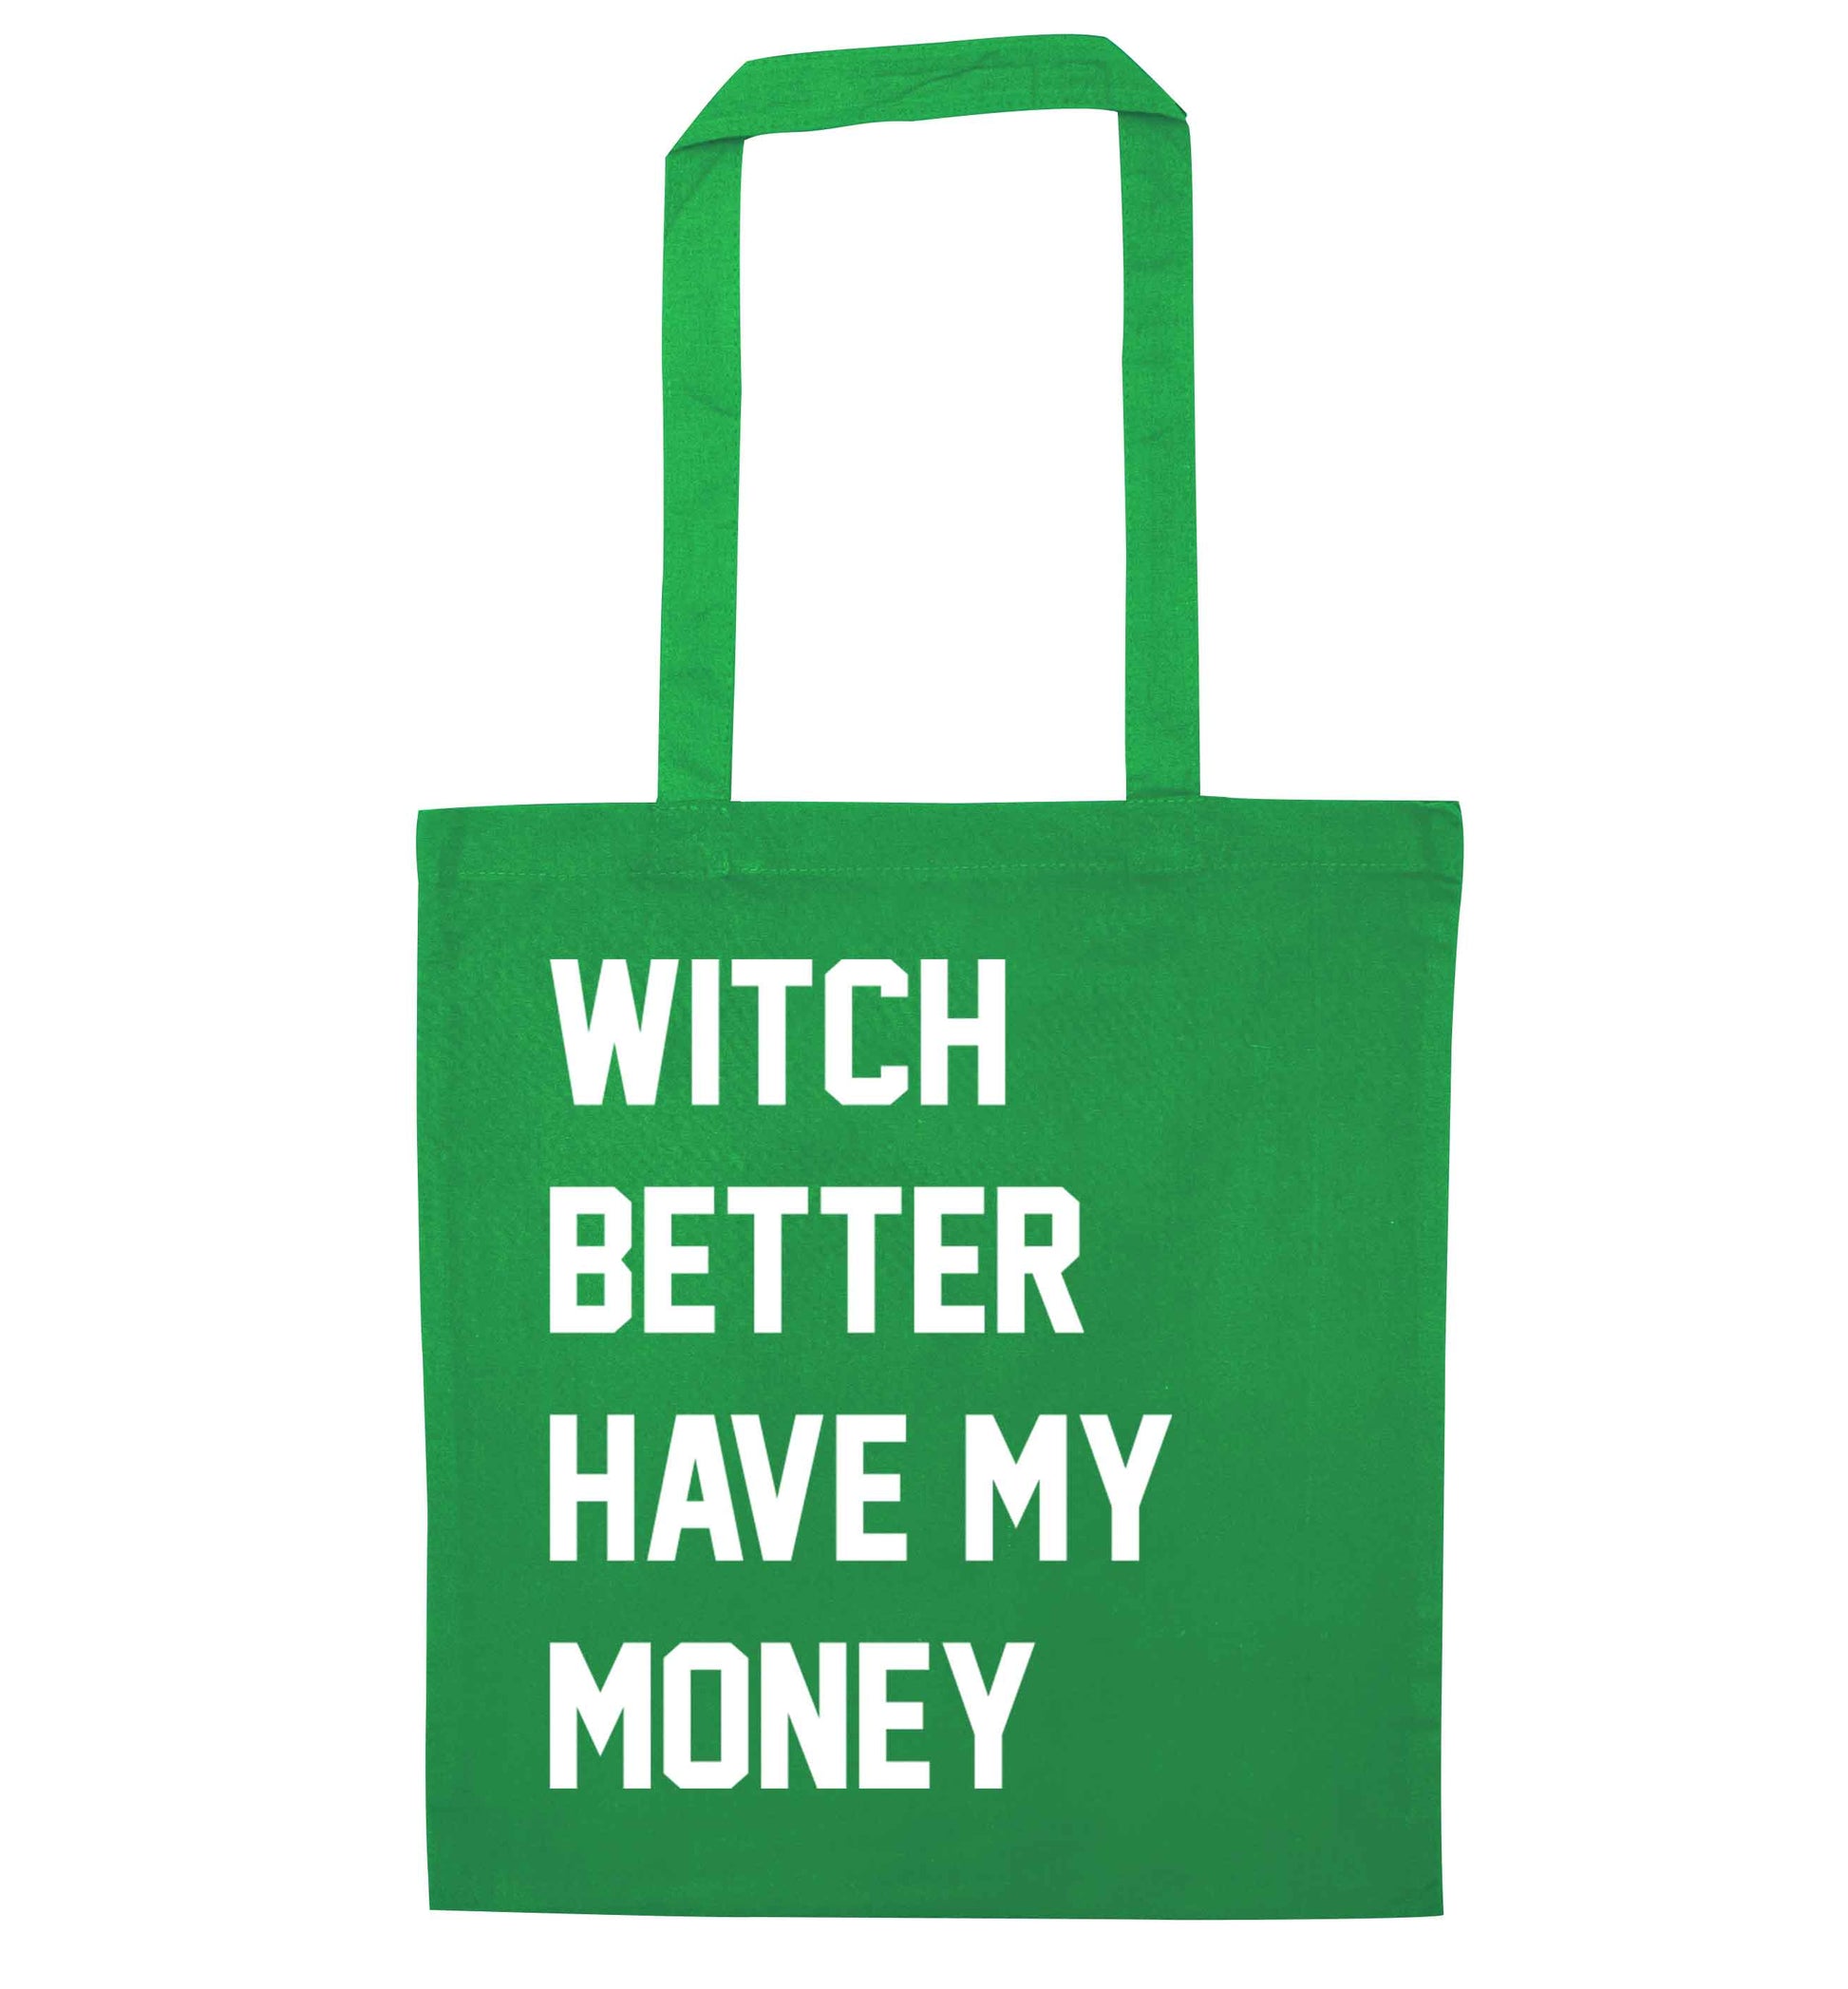 Witch better have my money green tote bag